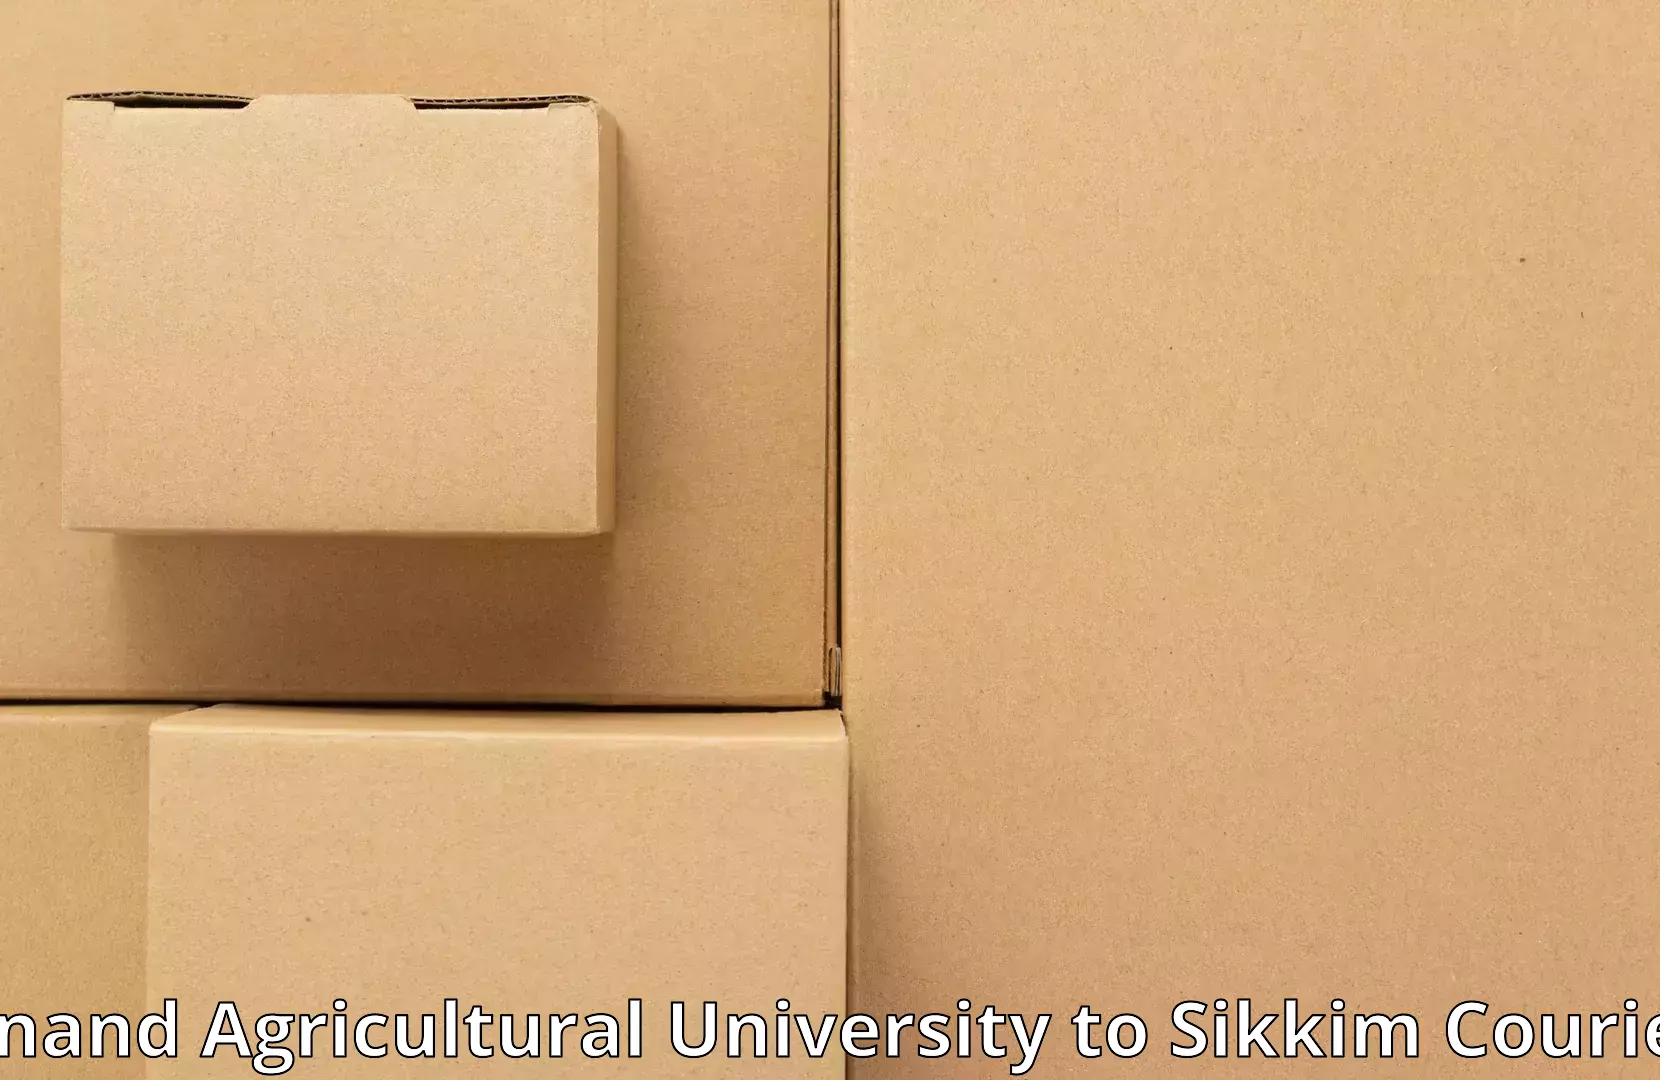 Furniture transport professionals Anand Agricultural University to Sikkim